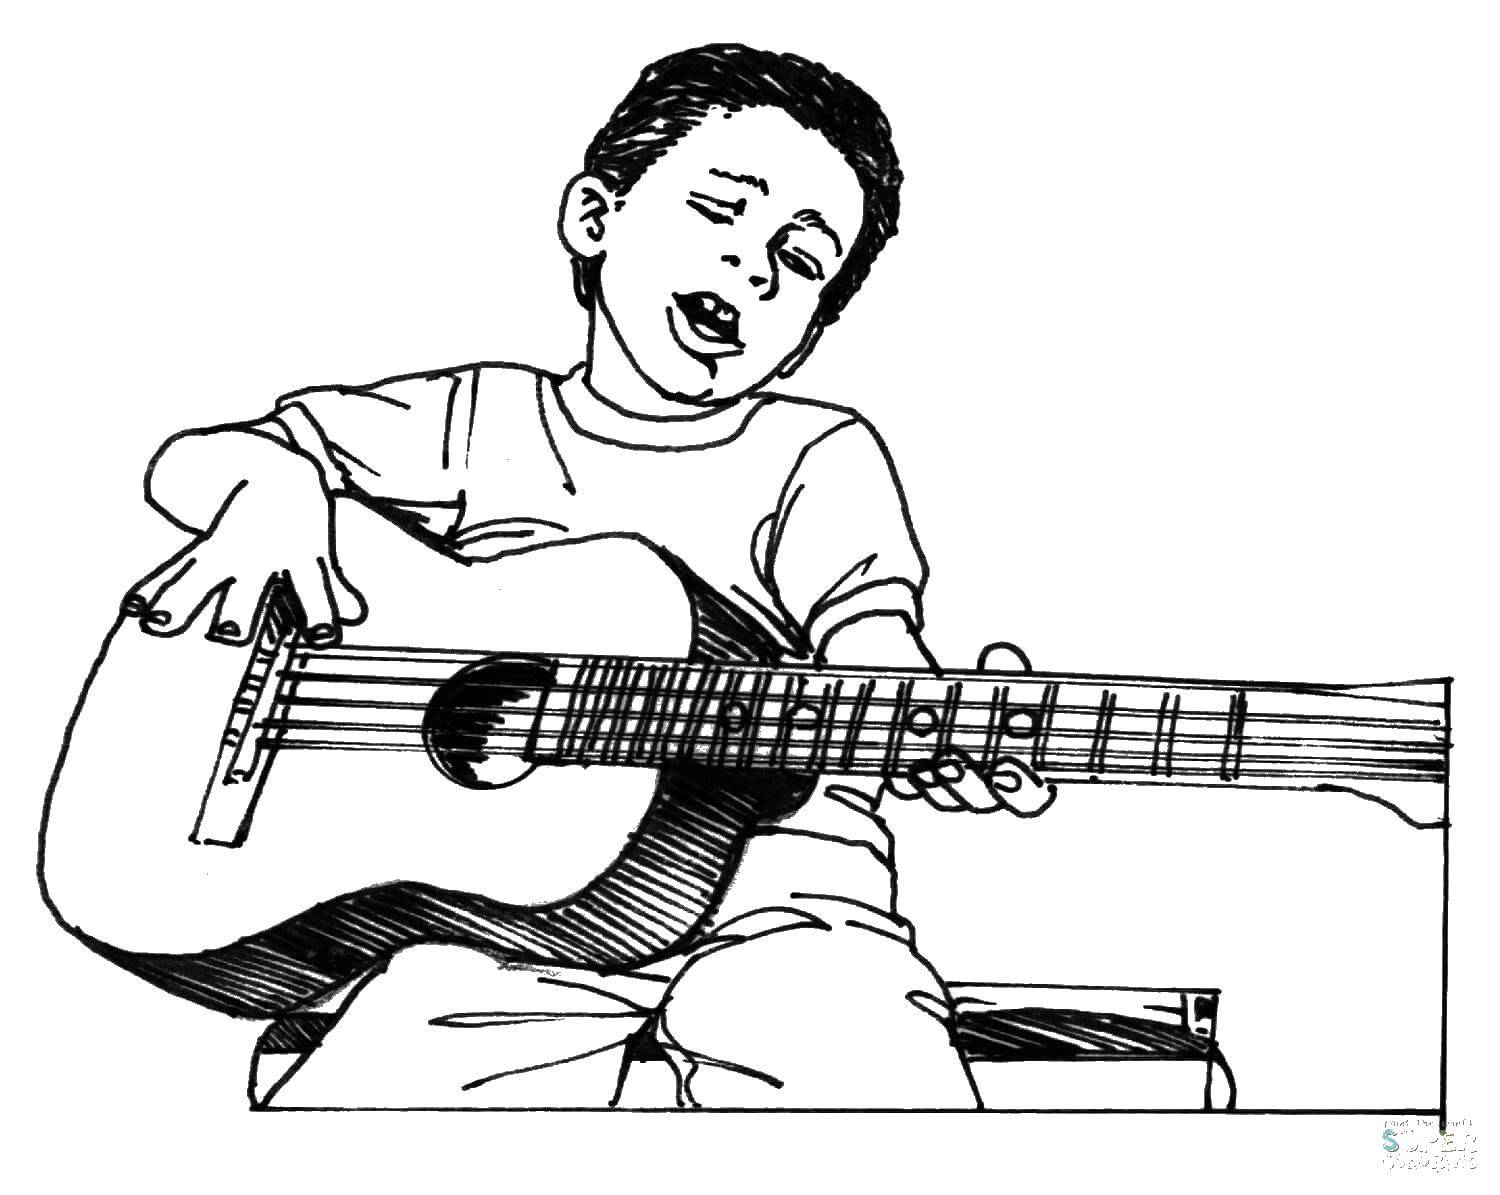 Coloring A boy and a guitar. Category Music. Tags:  boy, guitar.